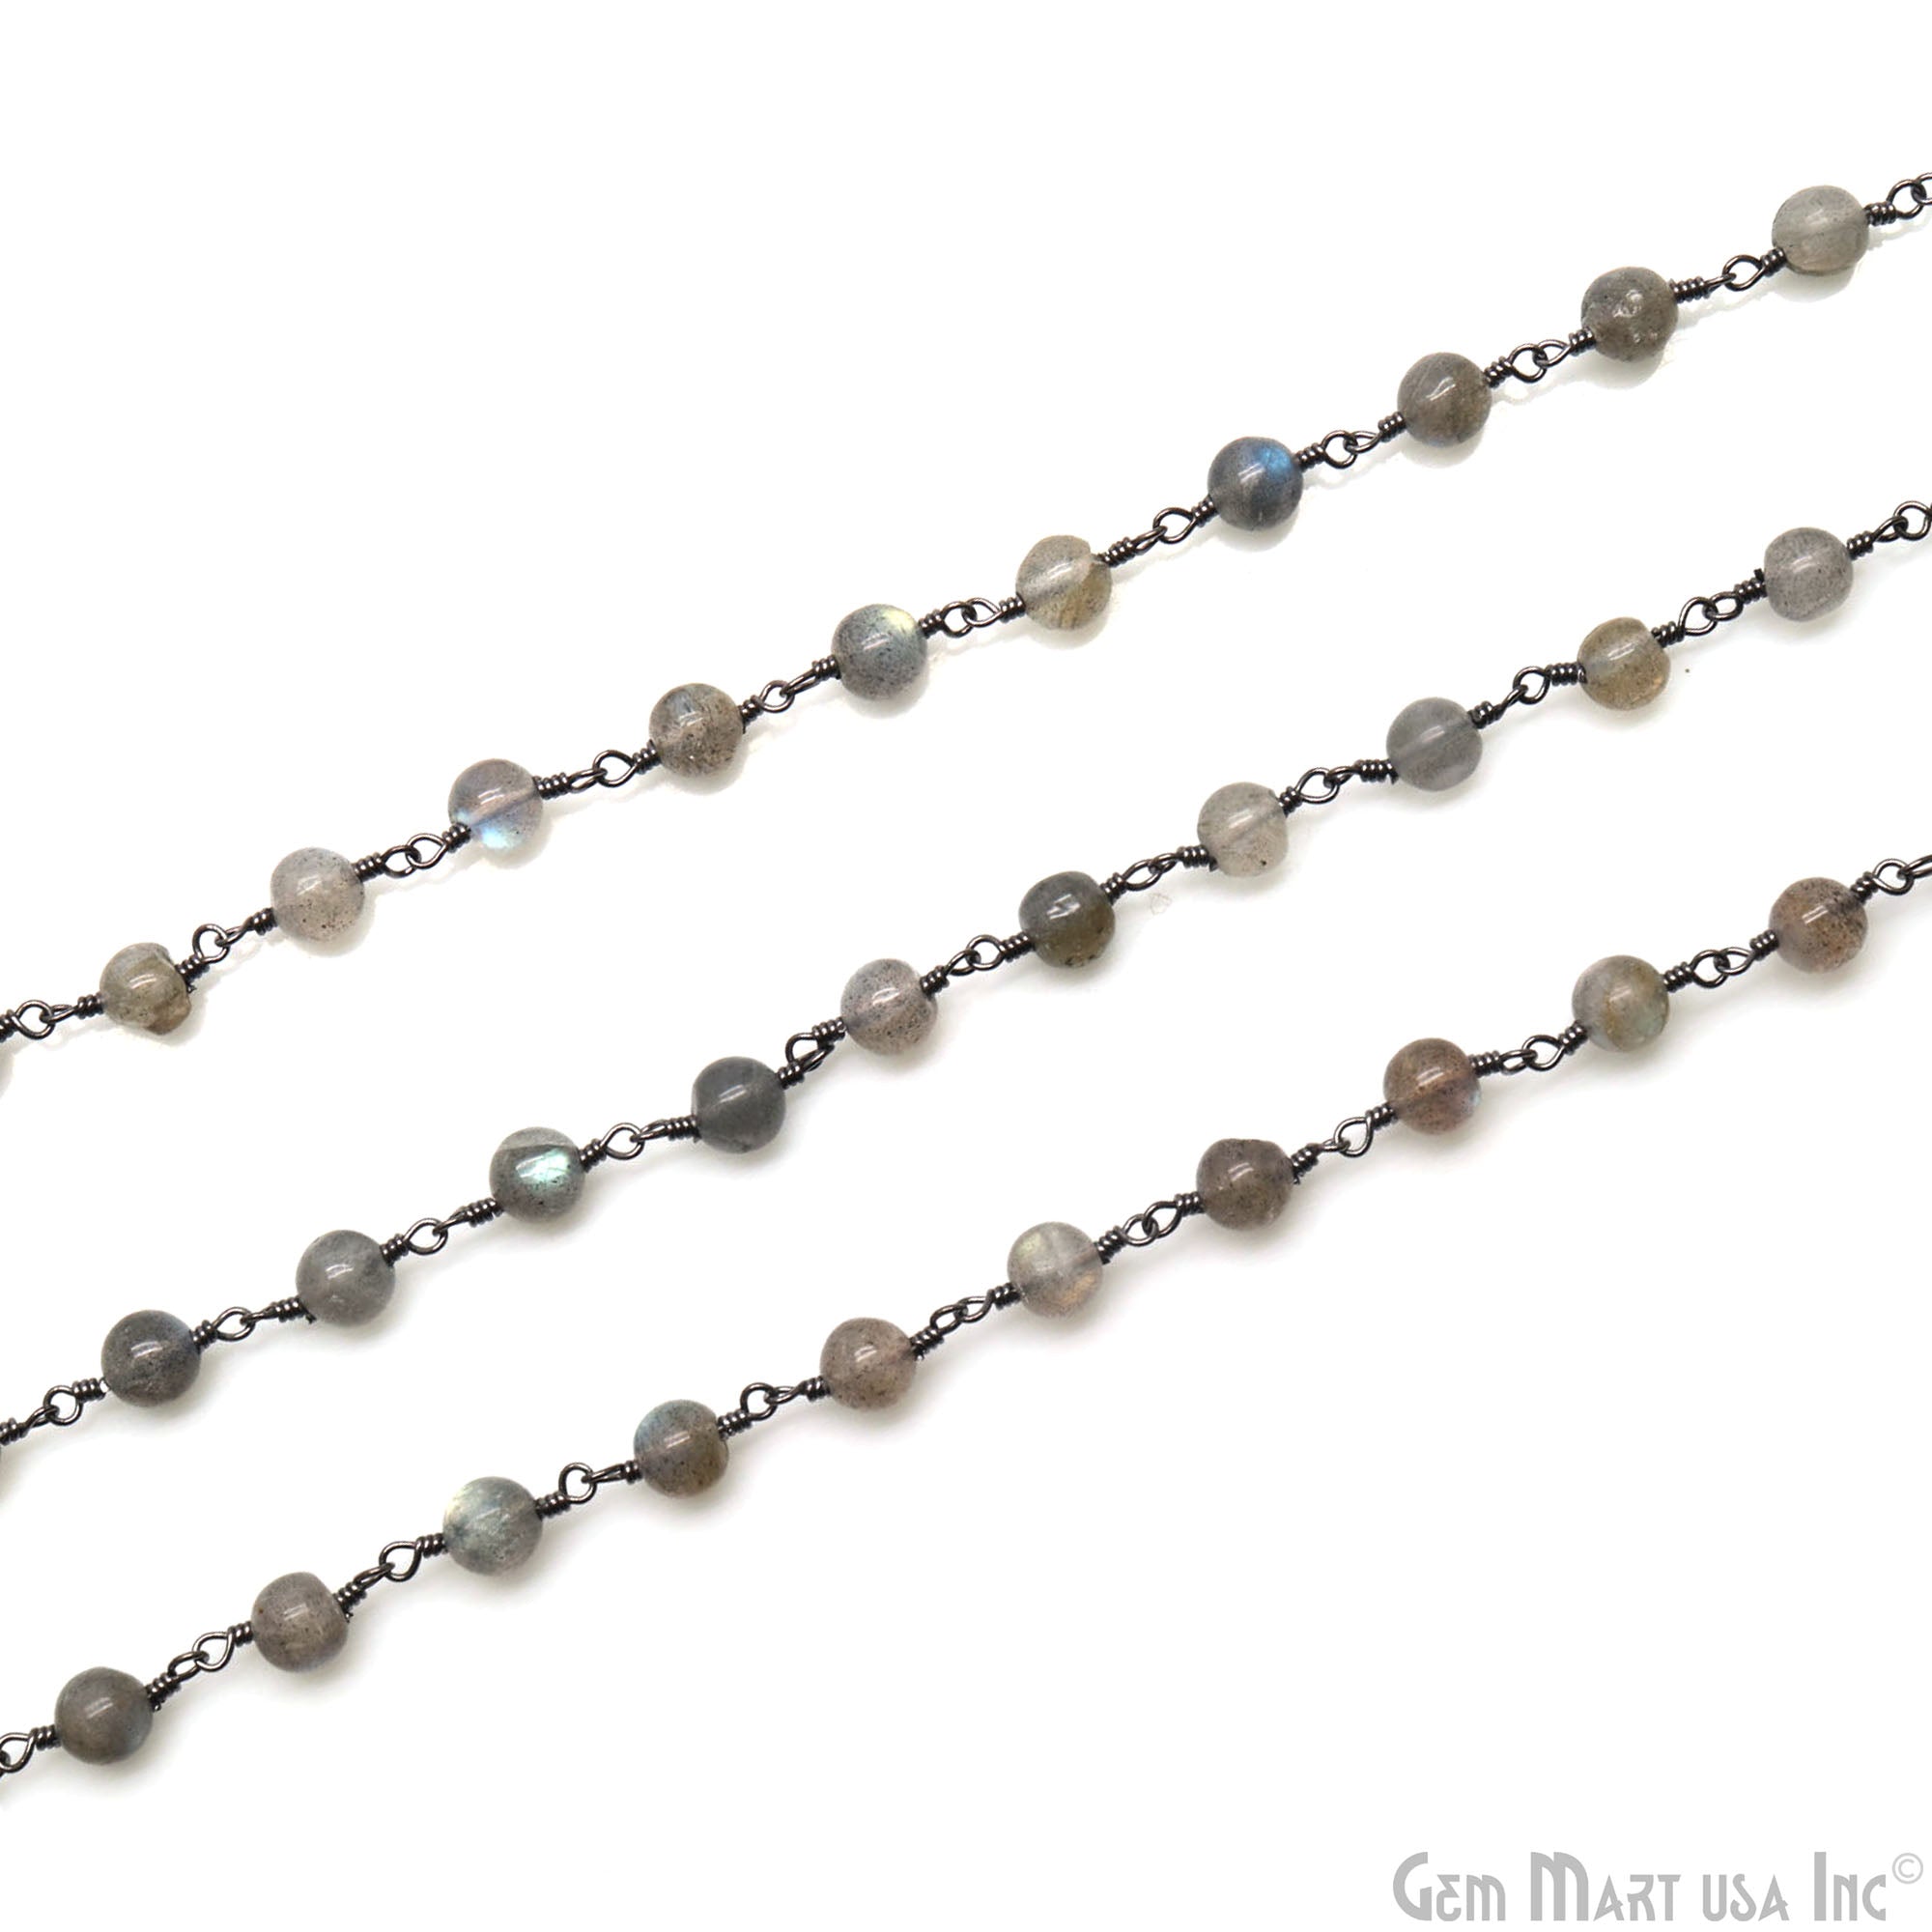 Labradorite 5-6mm Oxidized Wire Wrapped Cabochon Beads Rosary Chain